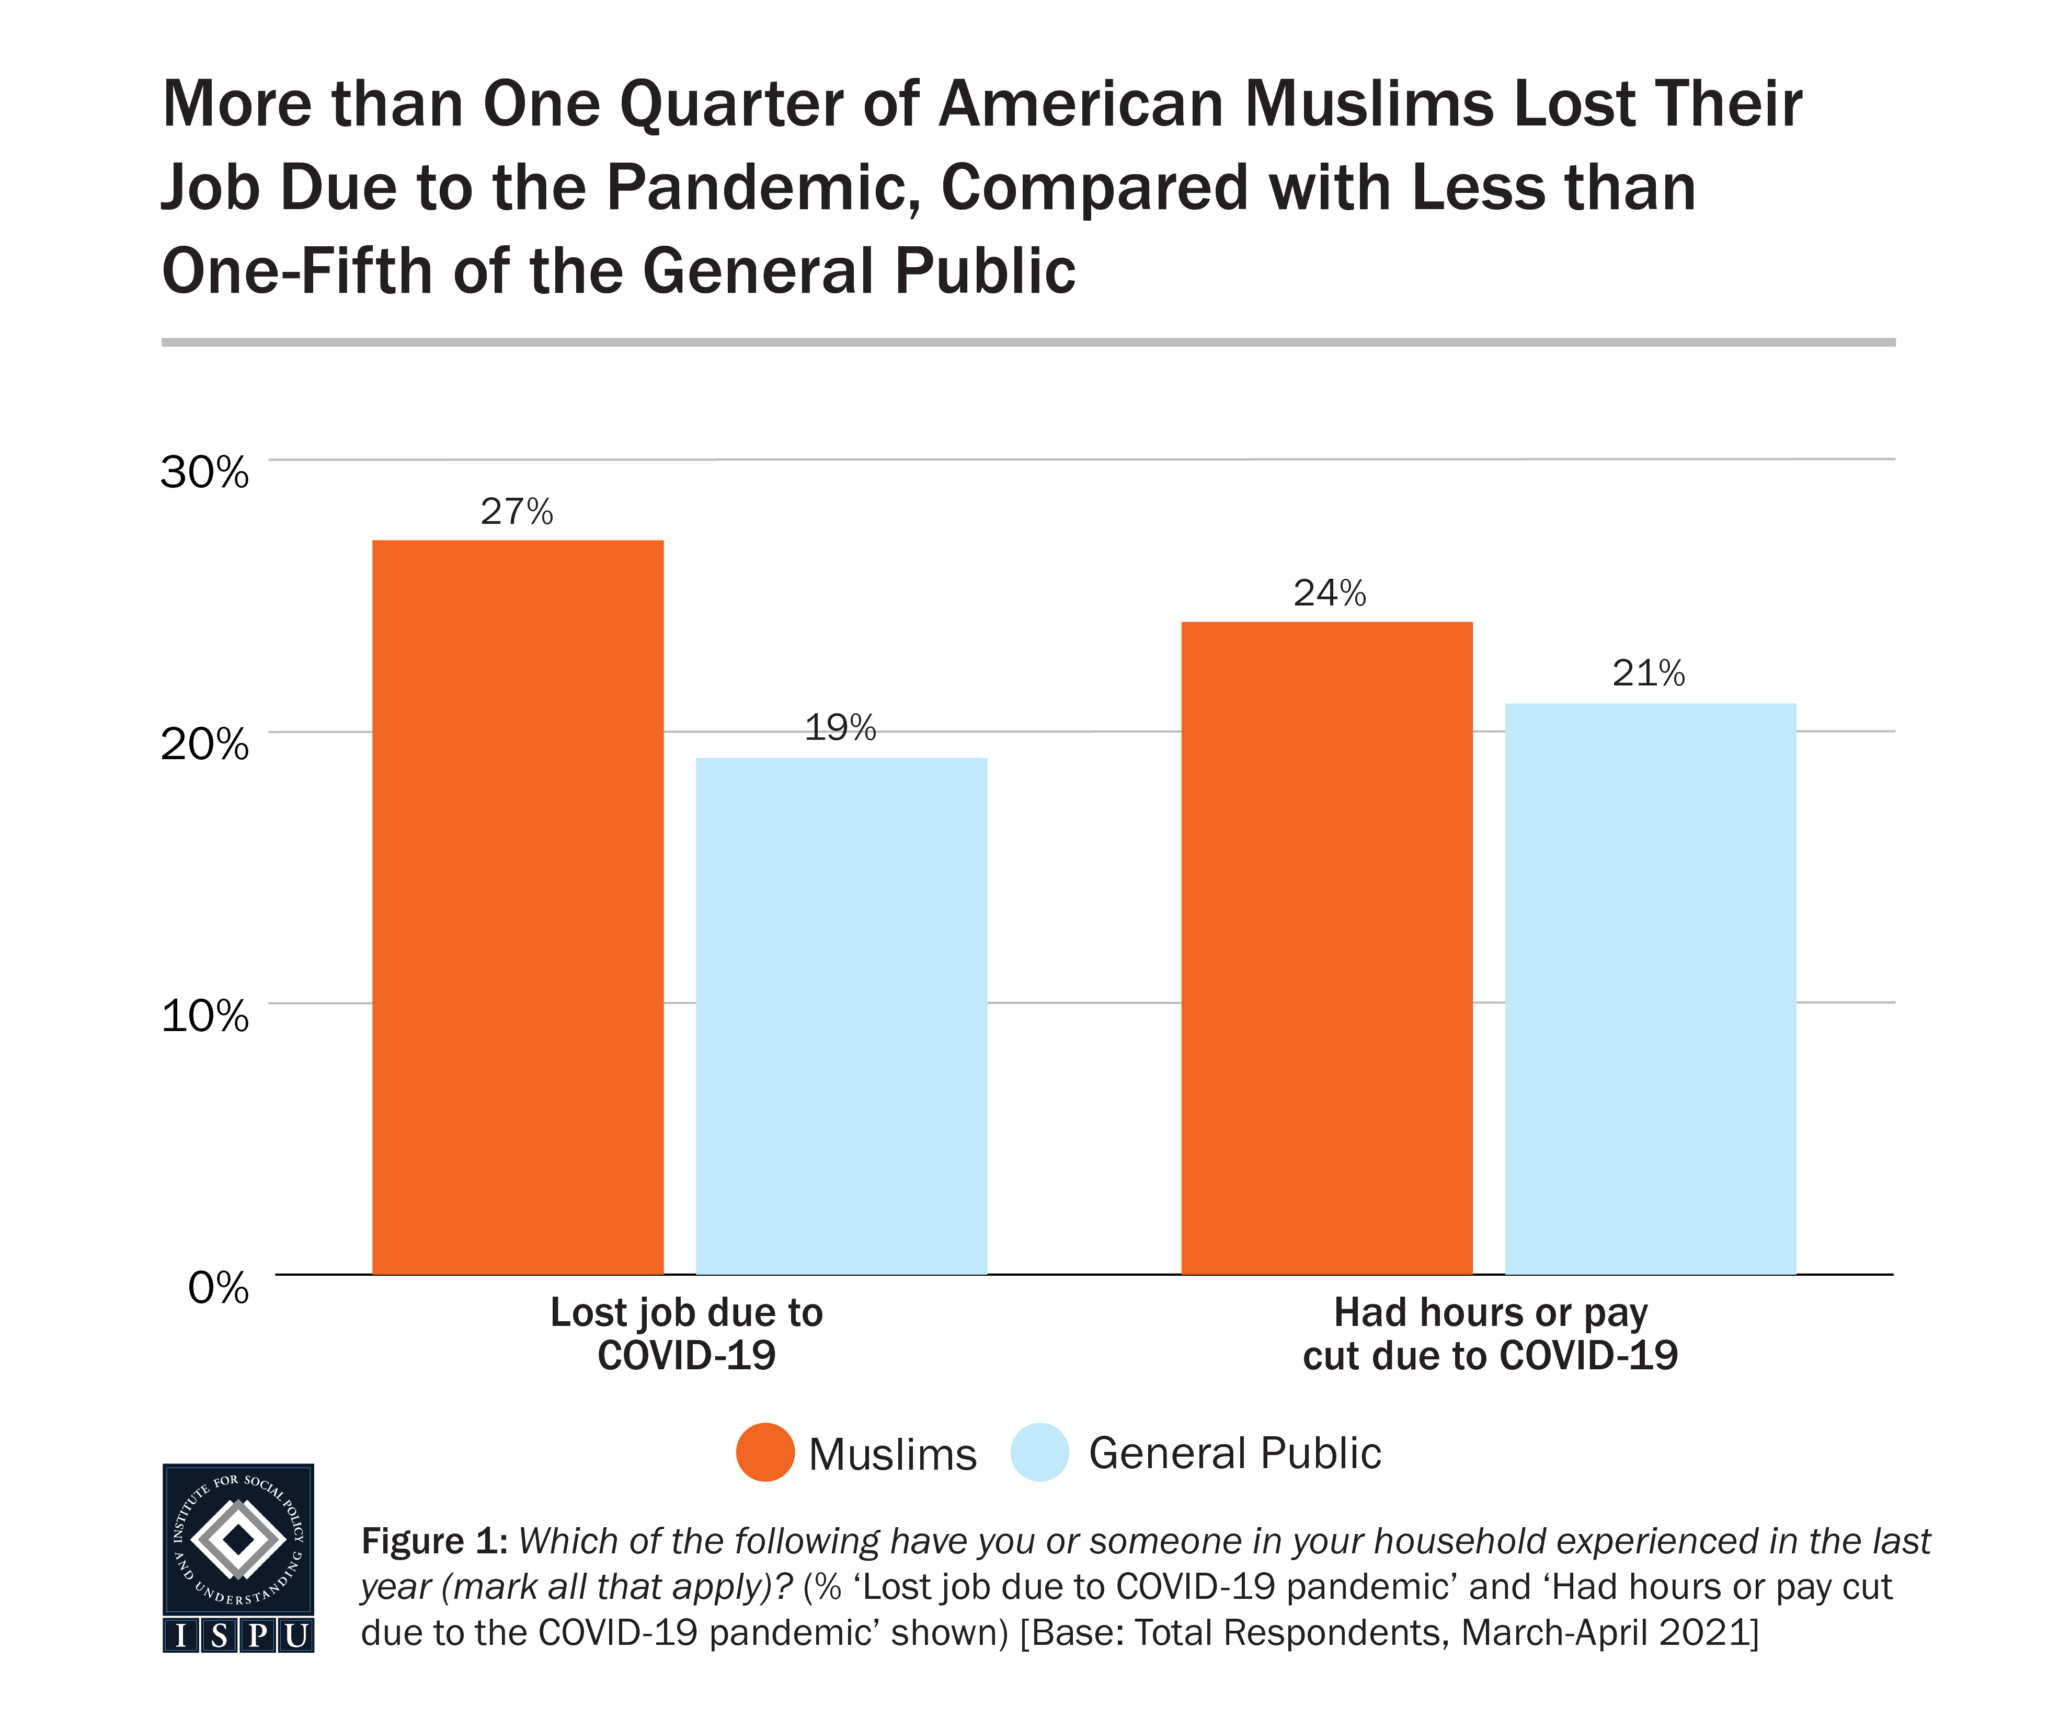 photo: statistics from Loss of Many Kinds: Financial and Health Impacts of COVID-19 on American Muslims